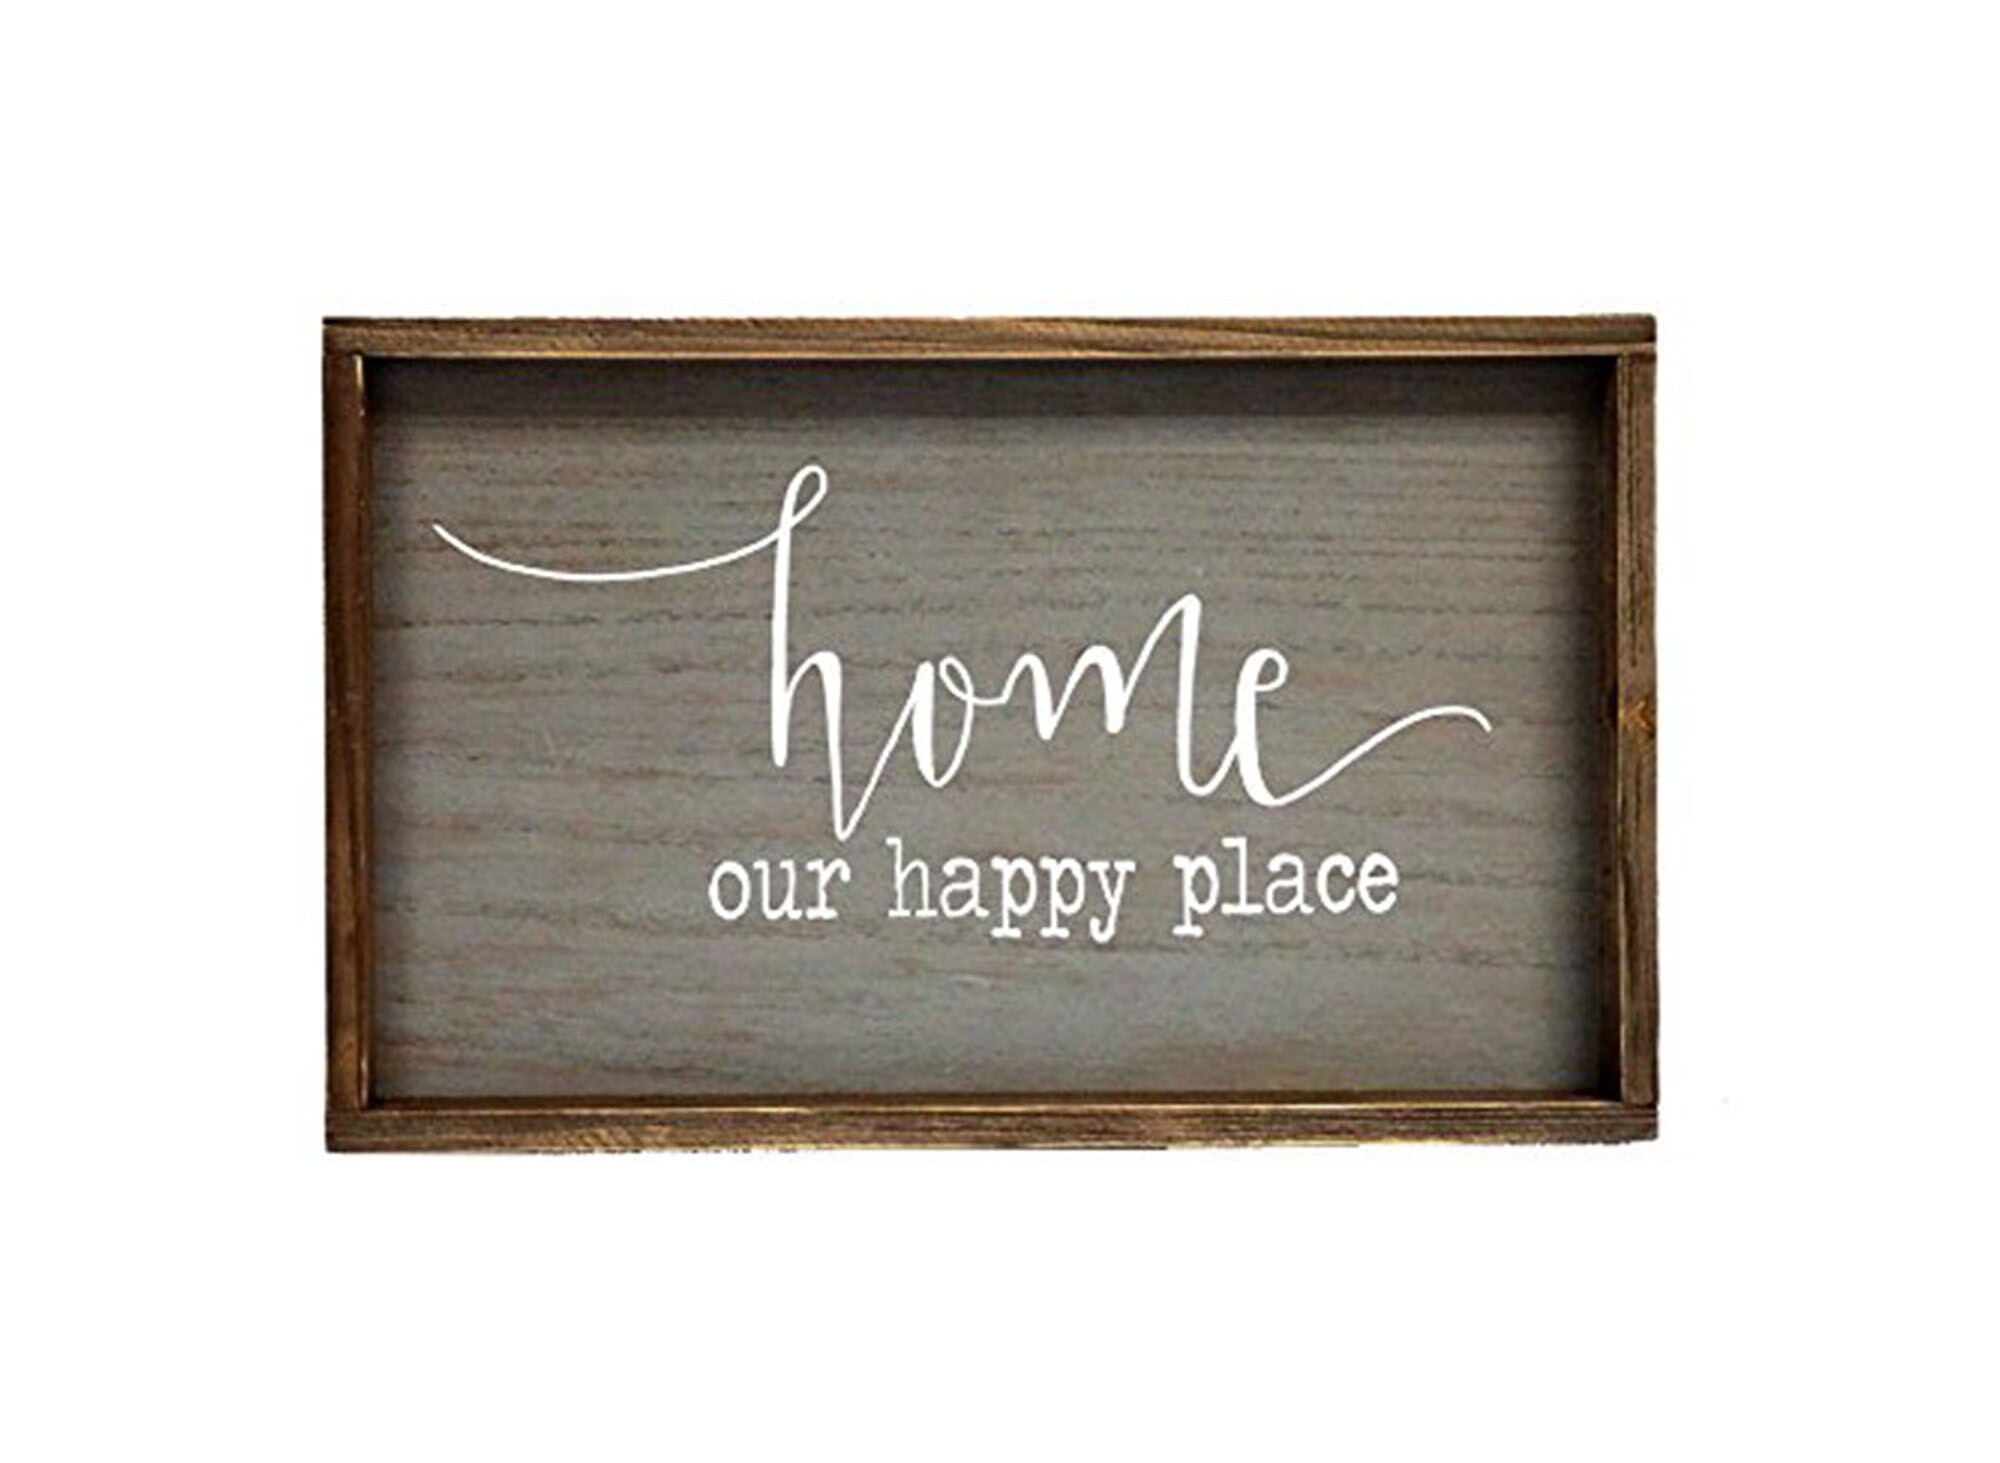 Welcome Happy Place Sign Wall Plaque or Hanging Shabby Chic French Provincial 